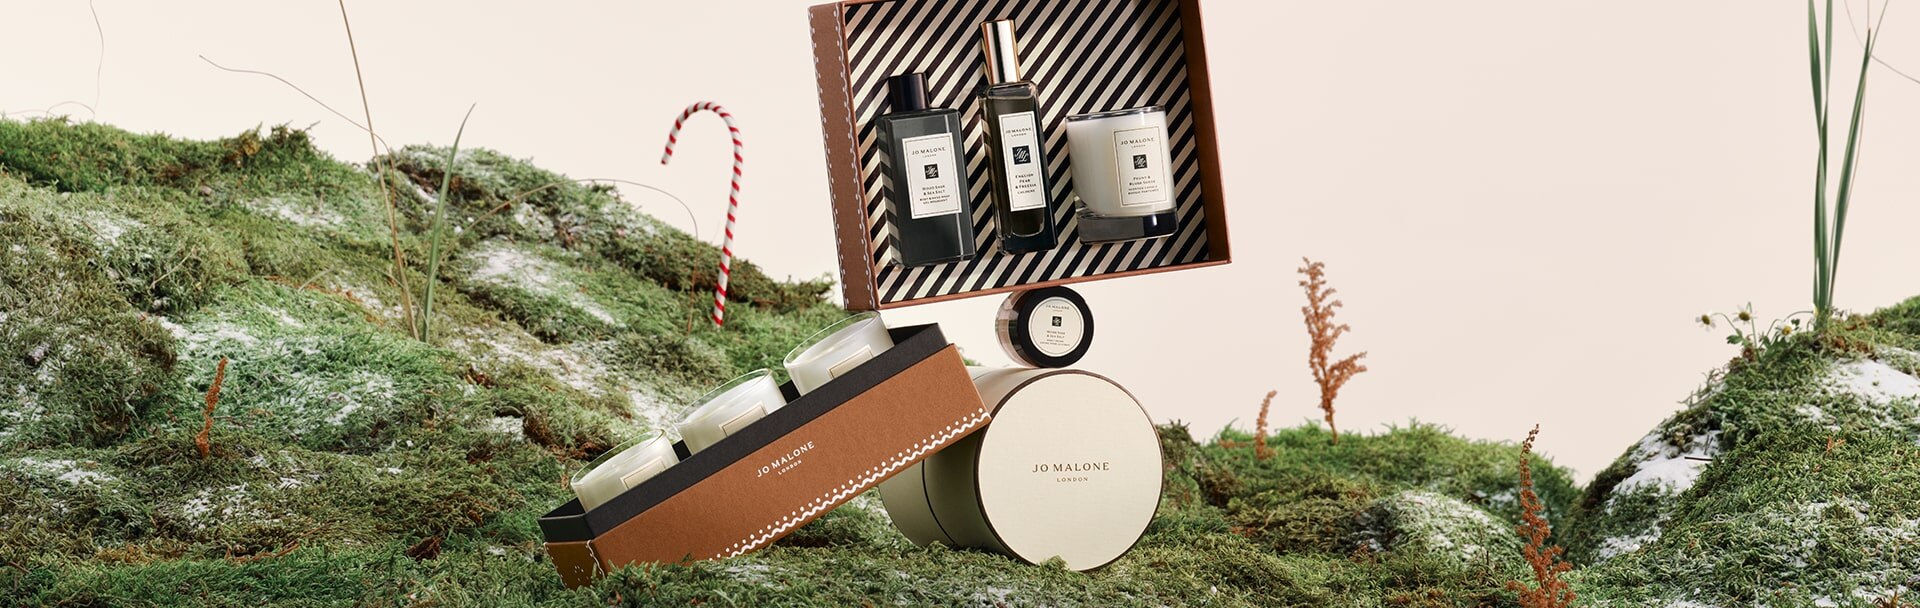 Jo malone london Christmas limited edition gingerbread collections stacked